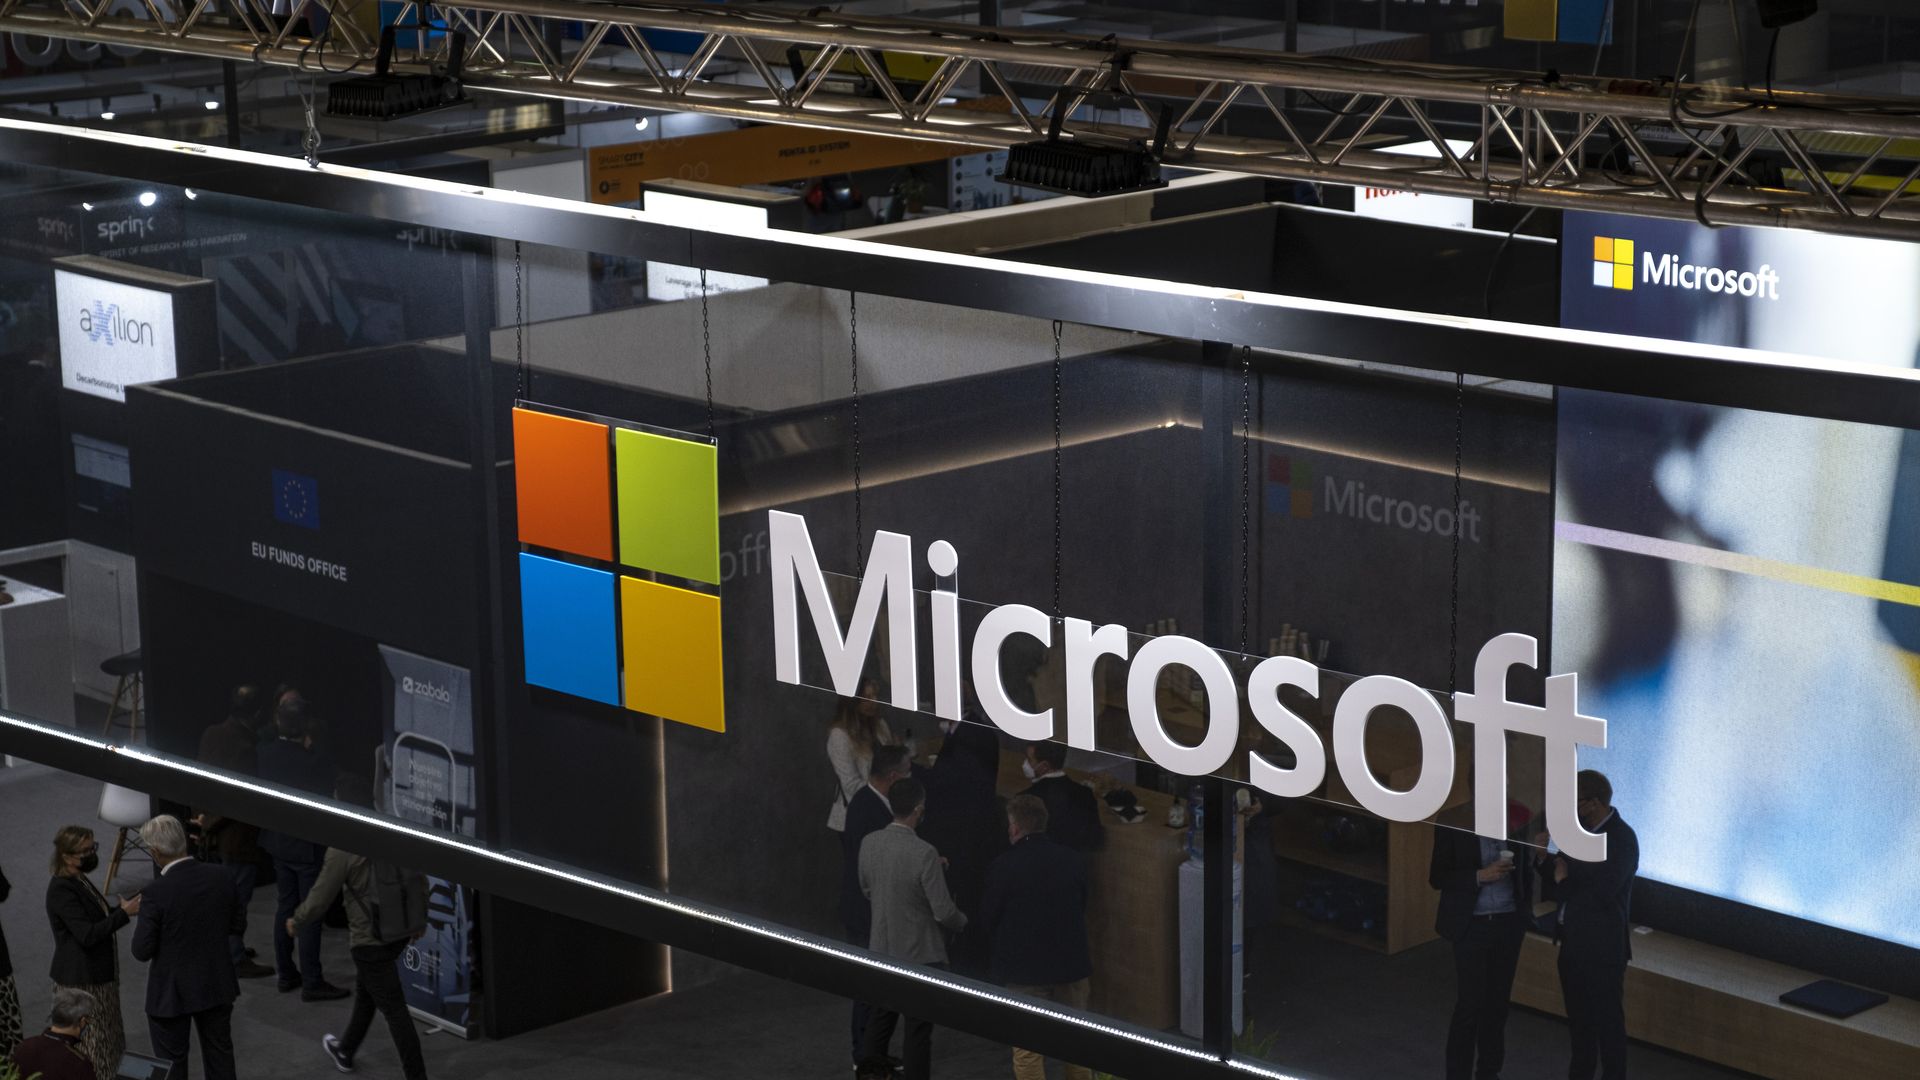 Microsoft company logo is seen during the SmartCity Expo World Congress 2021